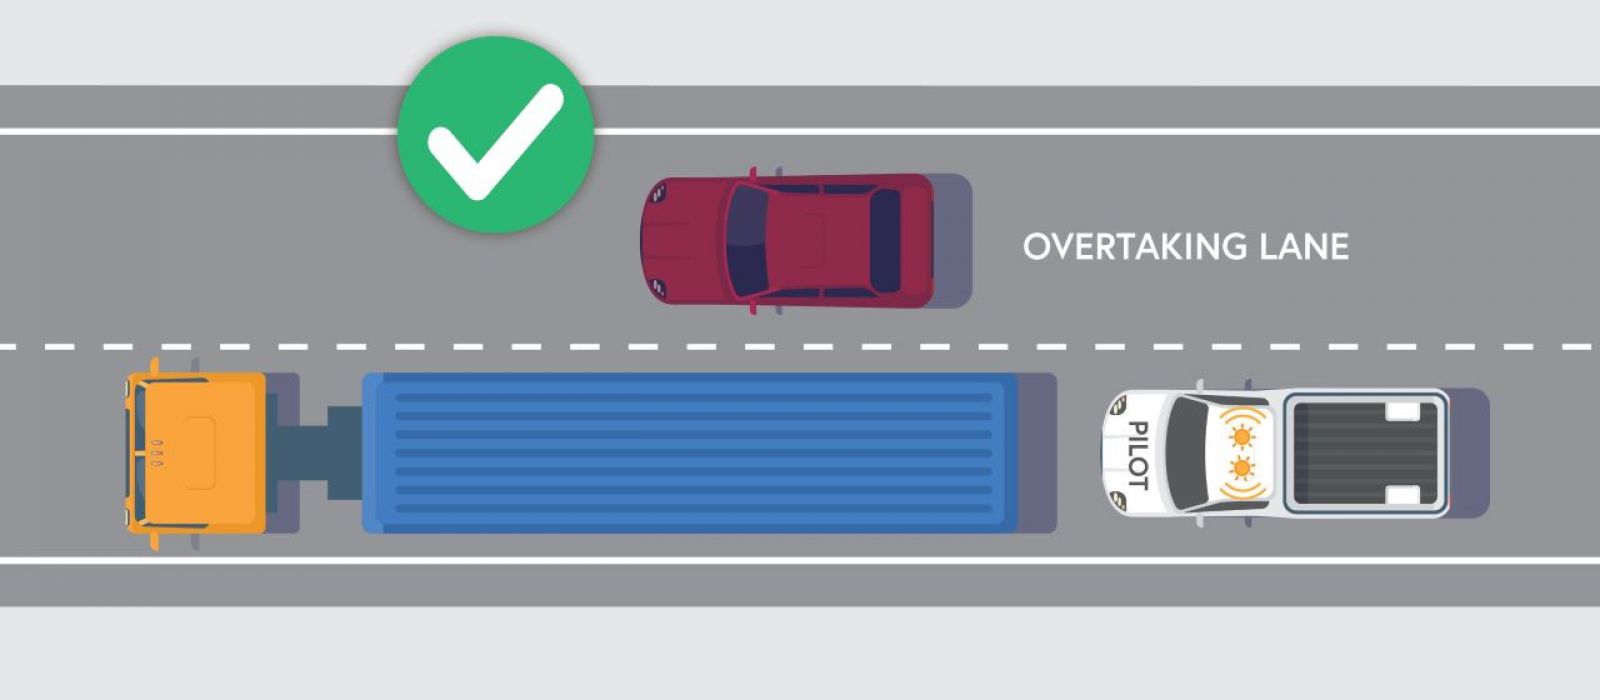 An infographic showing the correct way for a driver to overtake a truck carrying an oversized, overmass load. In this infographic, a motorist is able to drive past the Project's truck in a safe manner, as the truck is carrying an oversized concrete segment that does not encroach onto the motorist's overtaking lane.